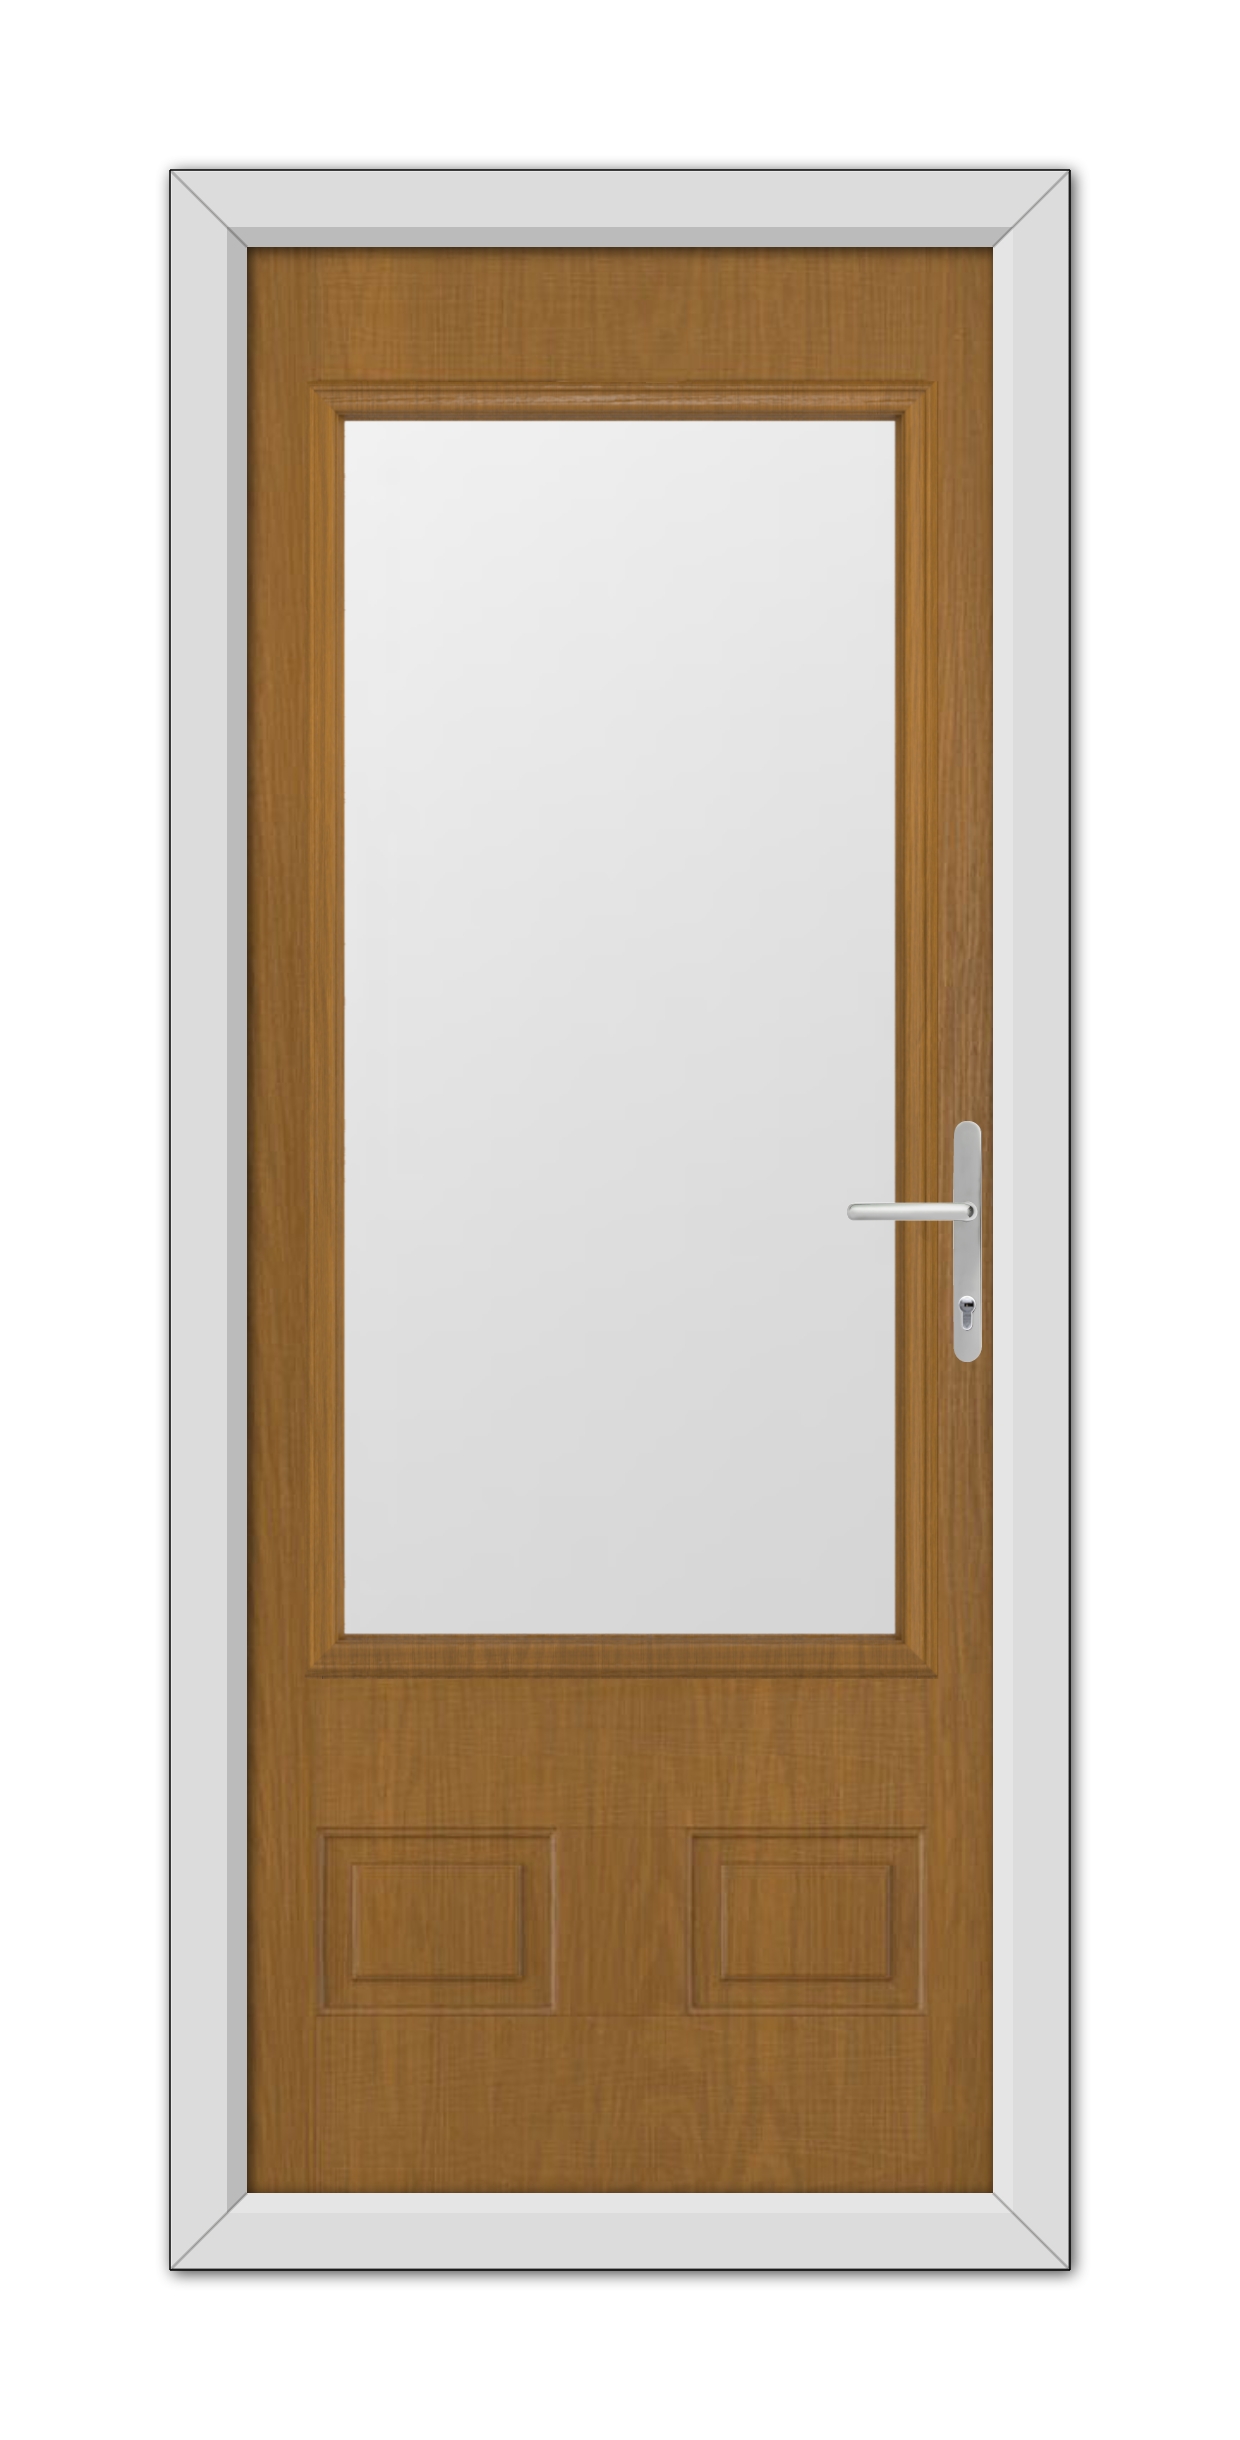 A Oak Walcot Composite Door 48mm Timber Core with a white insert and a silver handle, set within a white frame.